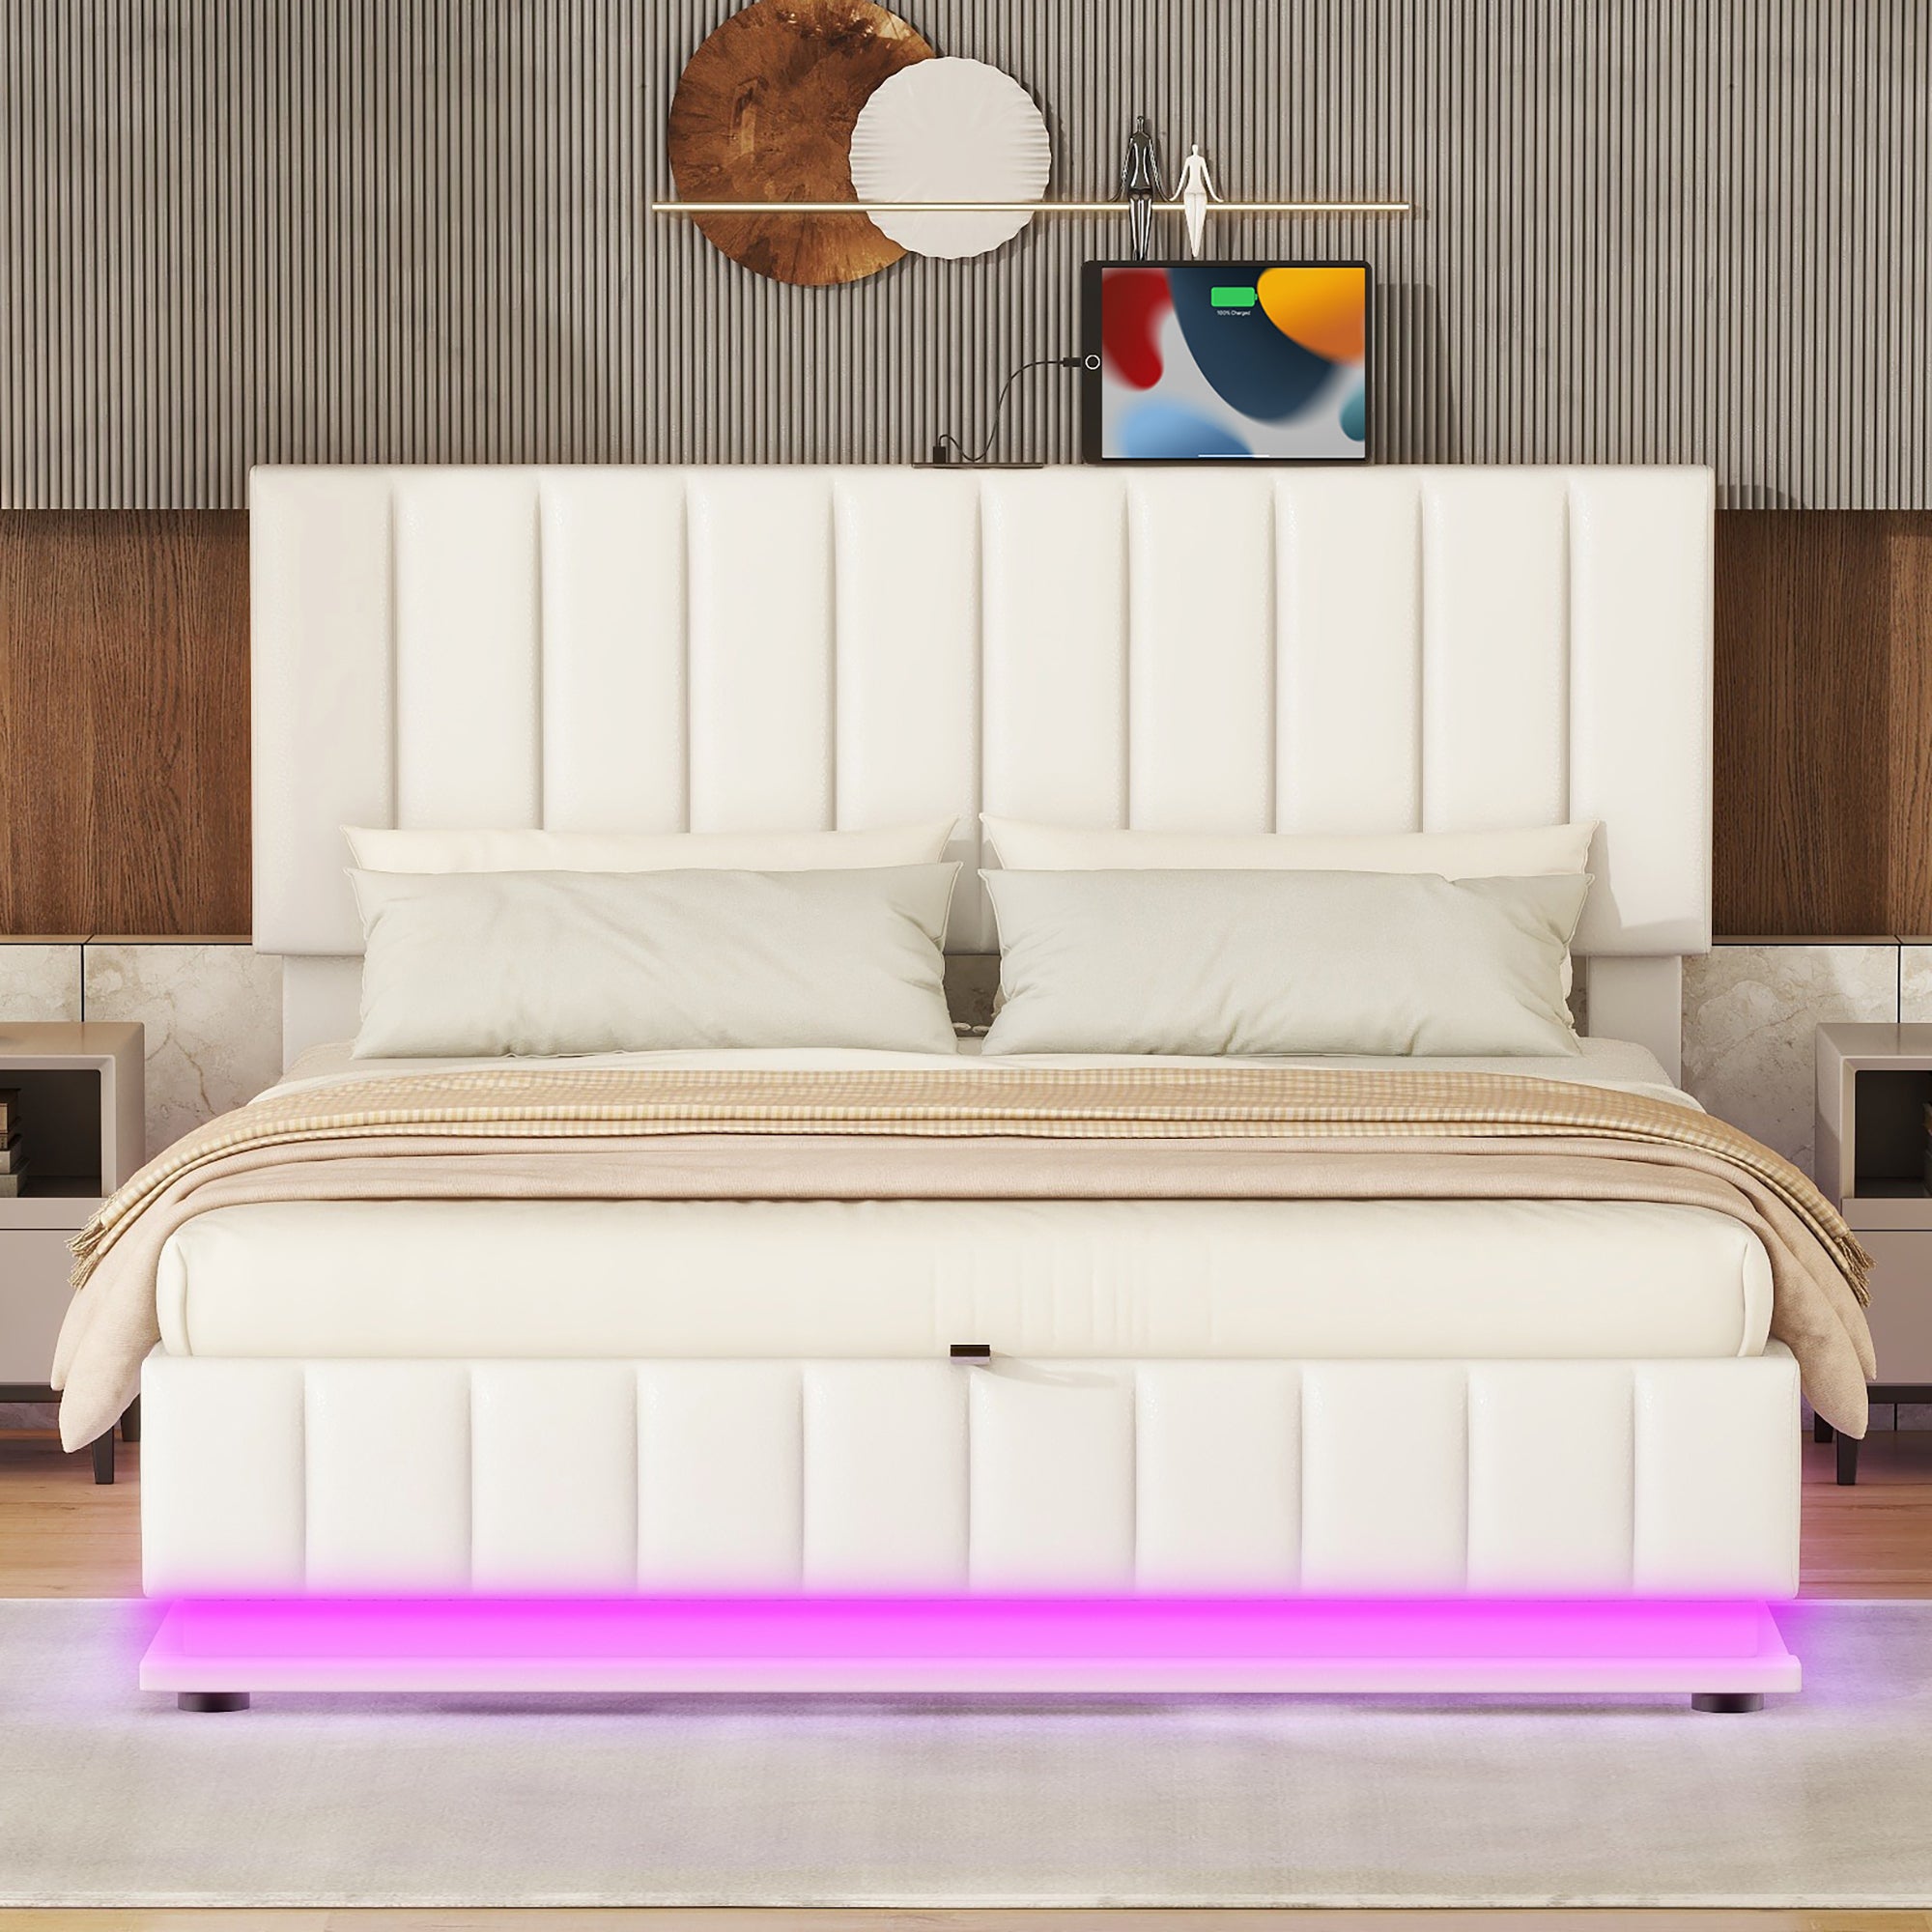 Skylar White Faux Leather Queen Platform Bed with Hydraulic Storage System and LED Light, Modern Platform Bed with Sockets and USB Ports